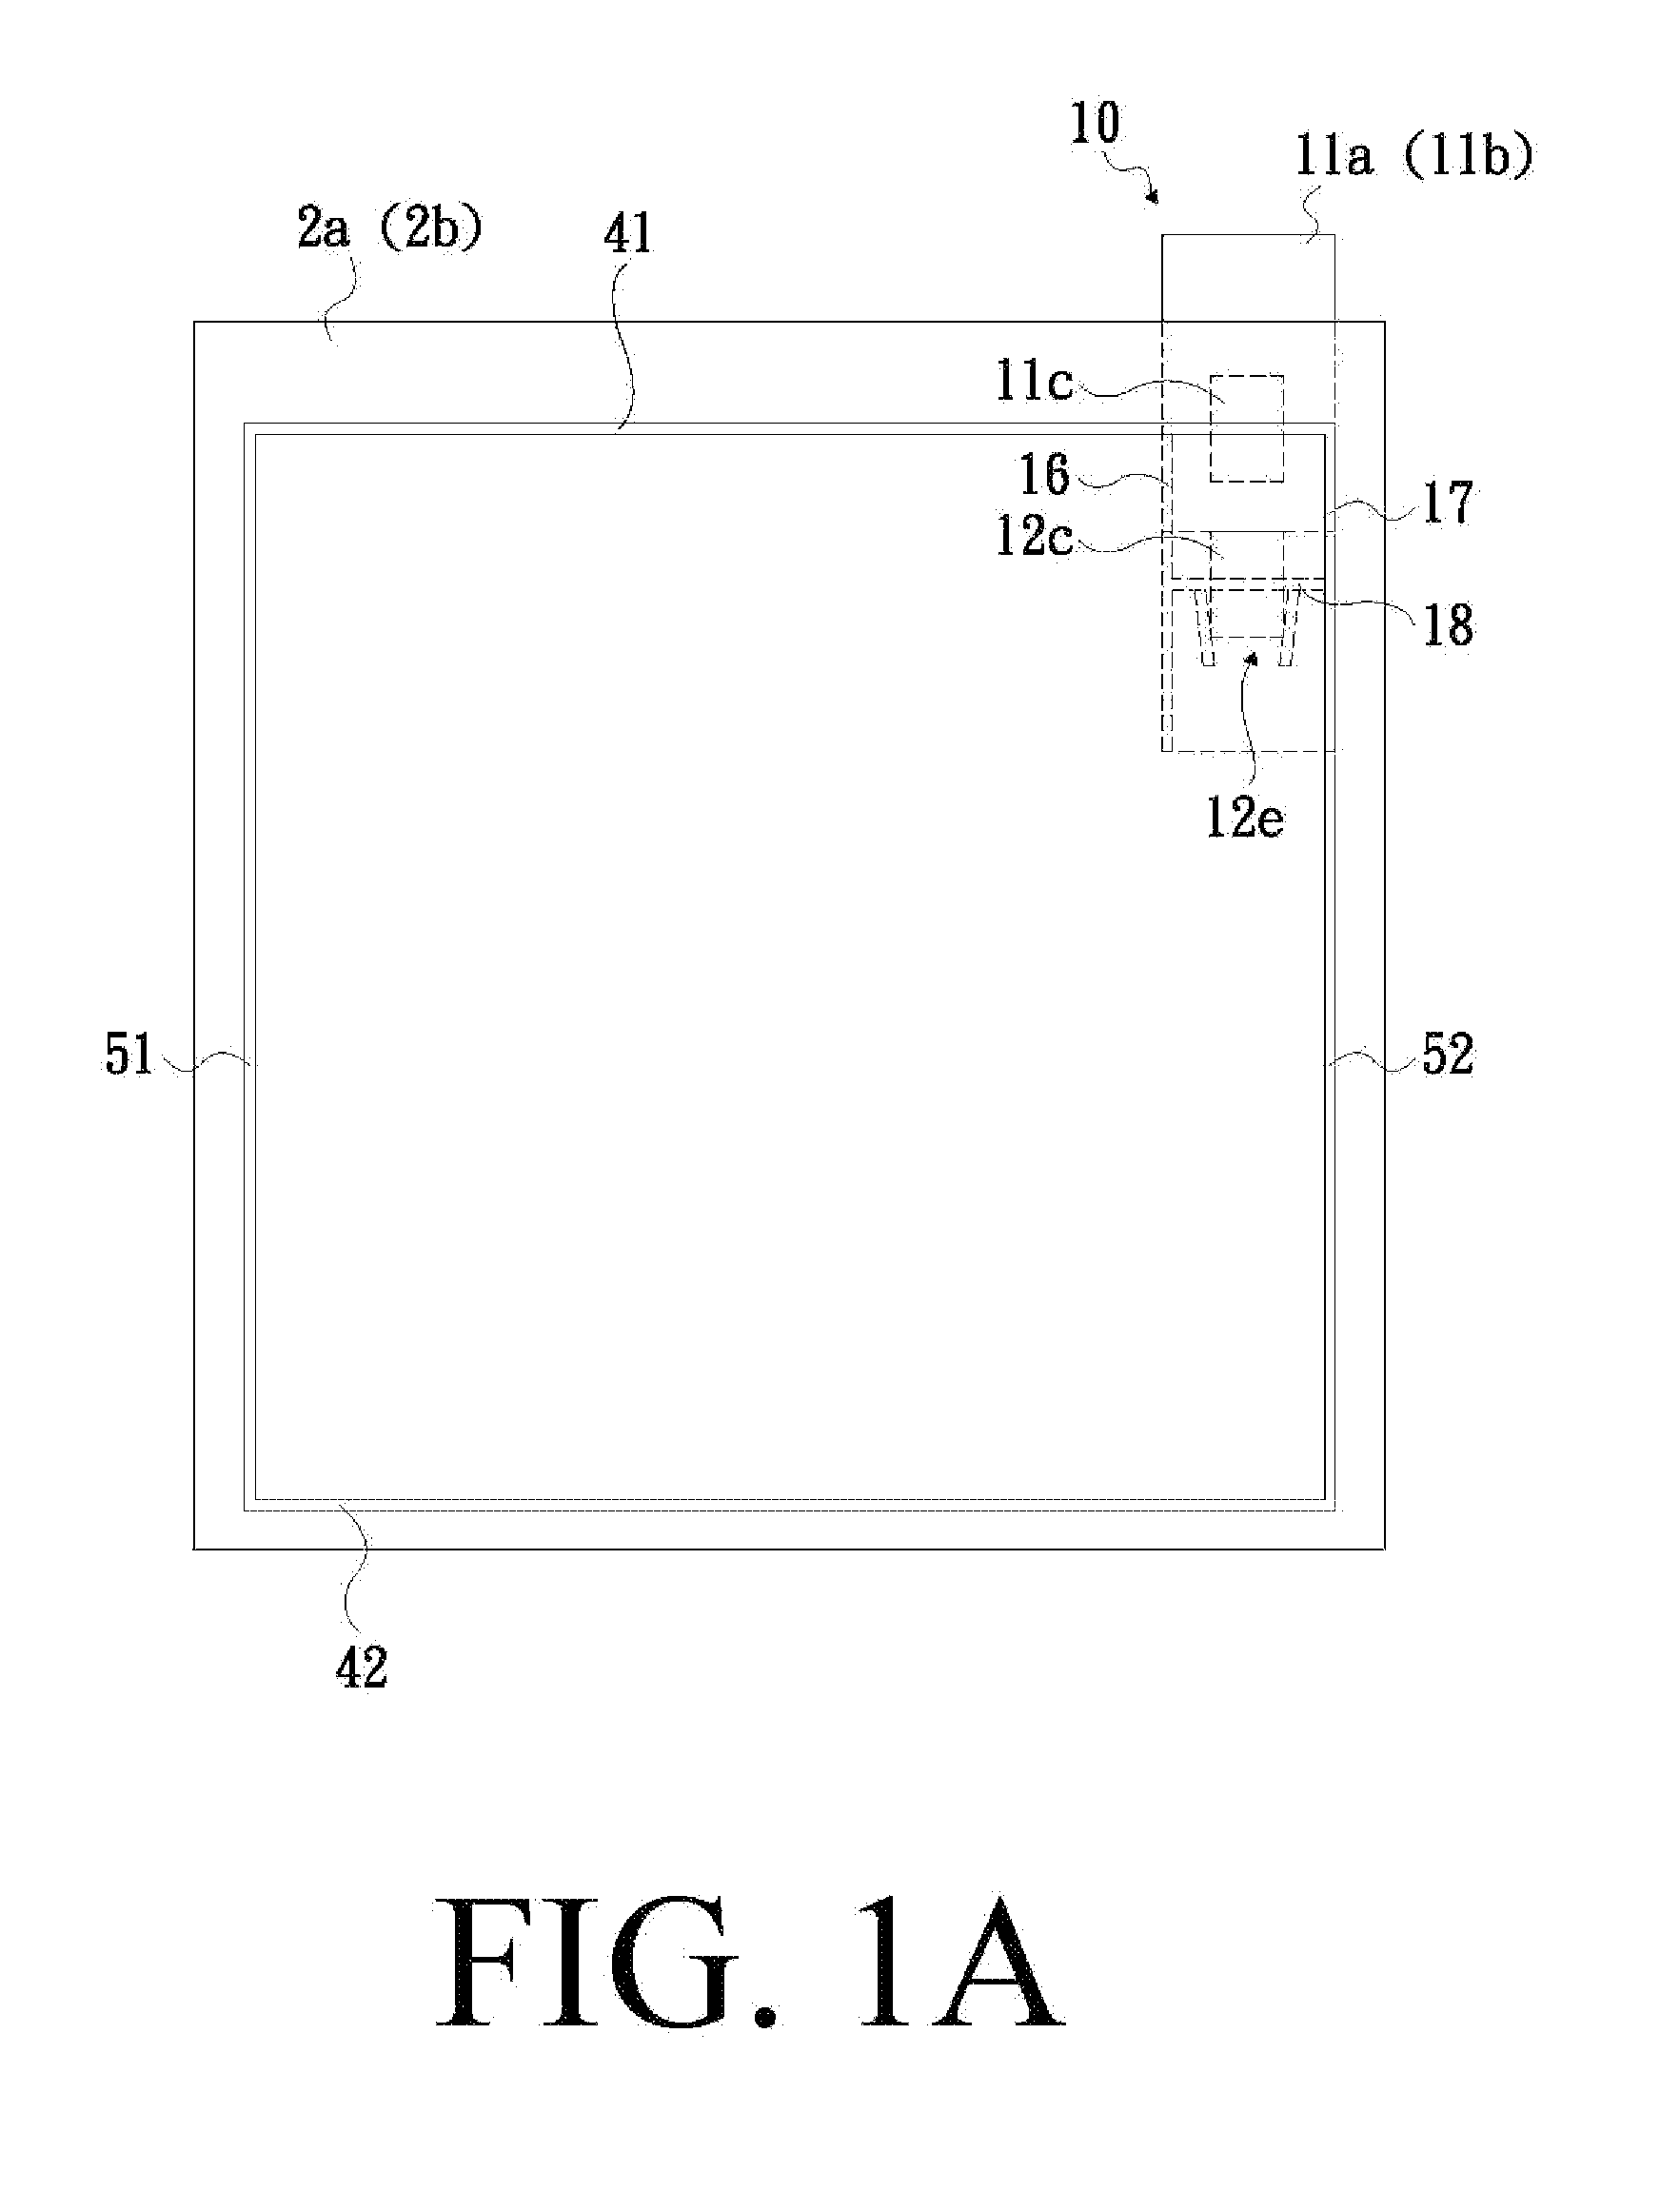 Air enlcosure and check value thereof capable of being filled with high pressure air